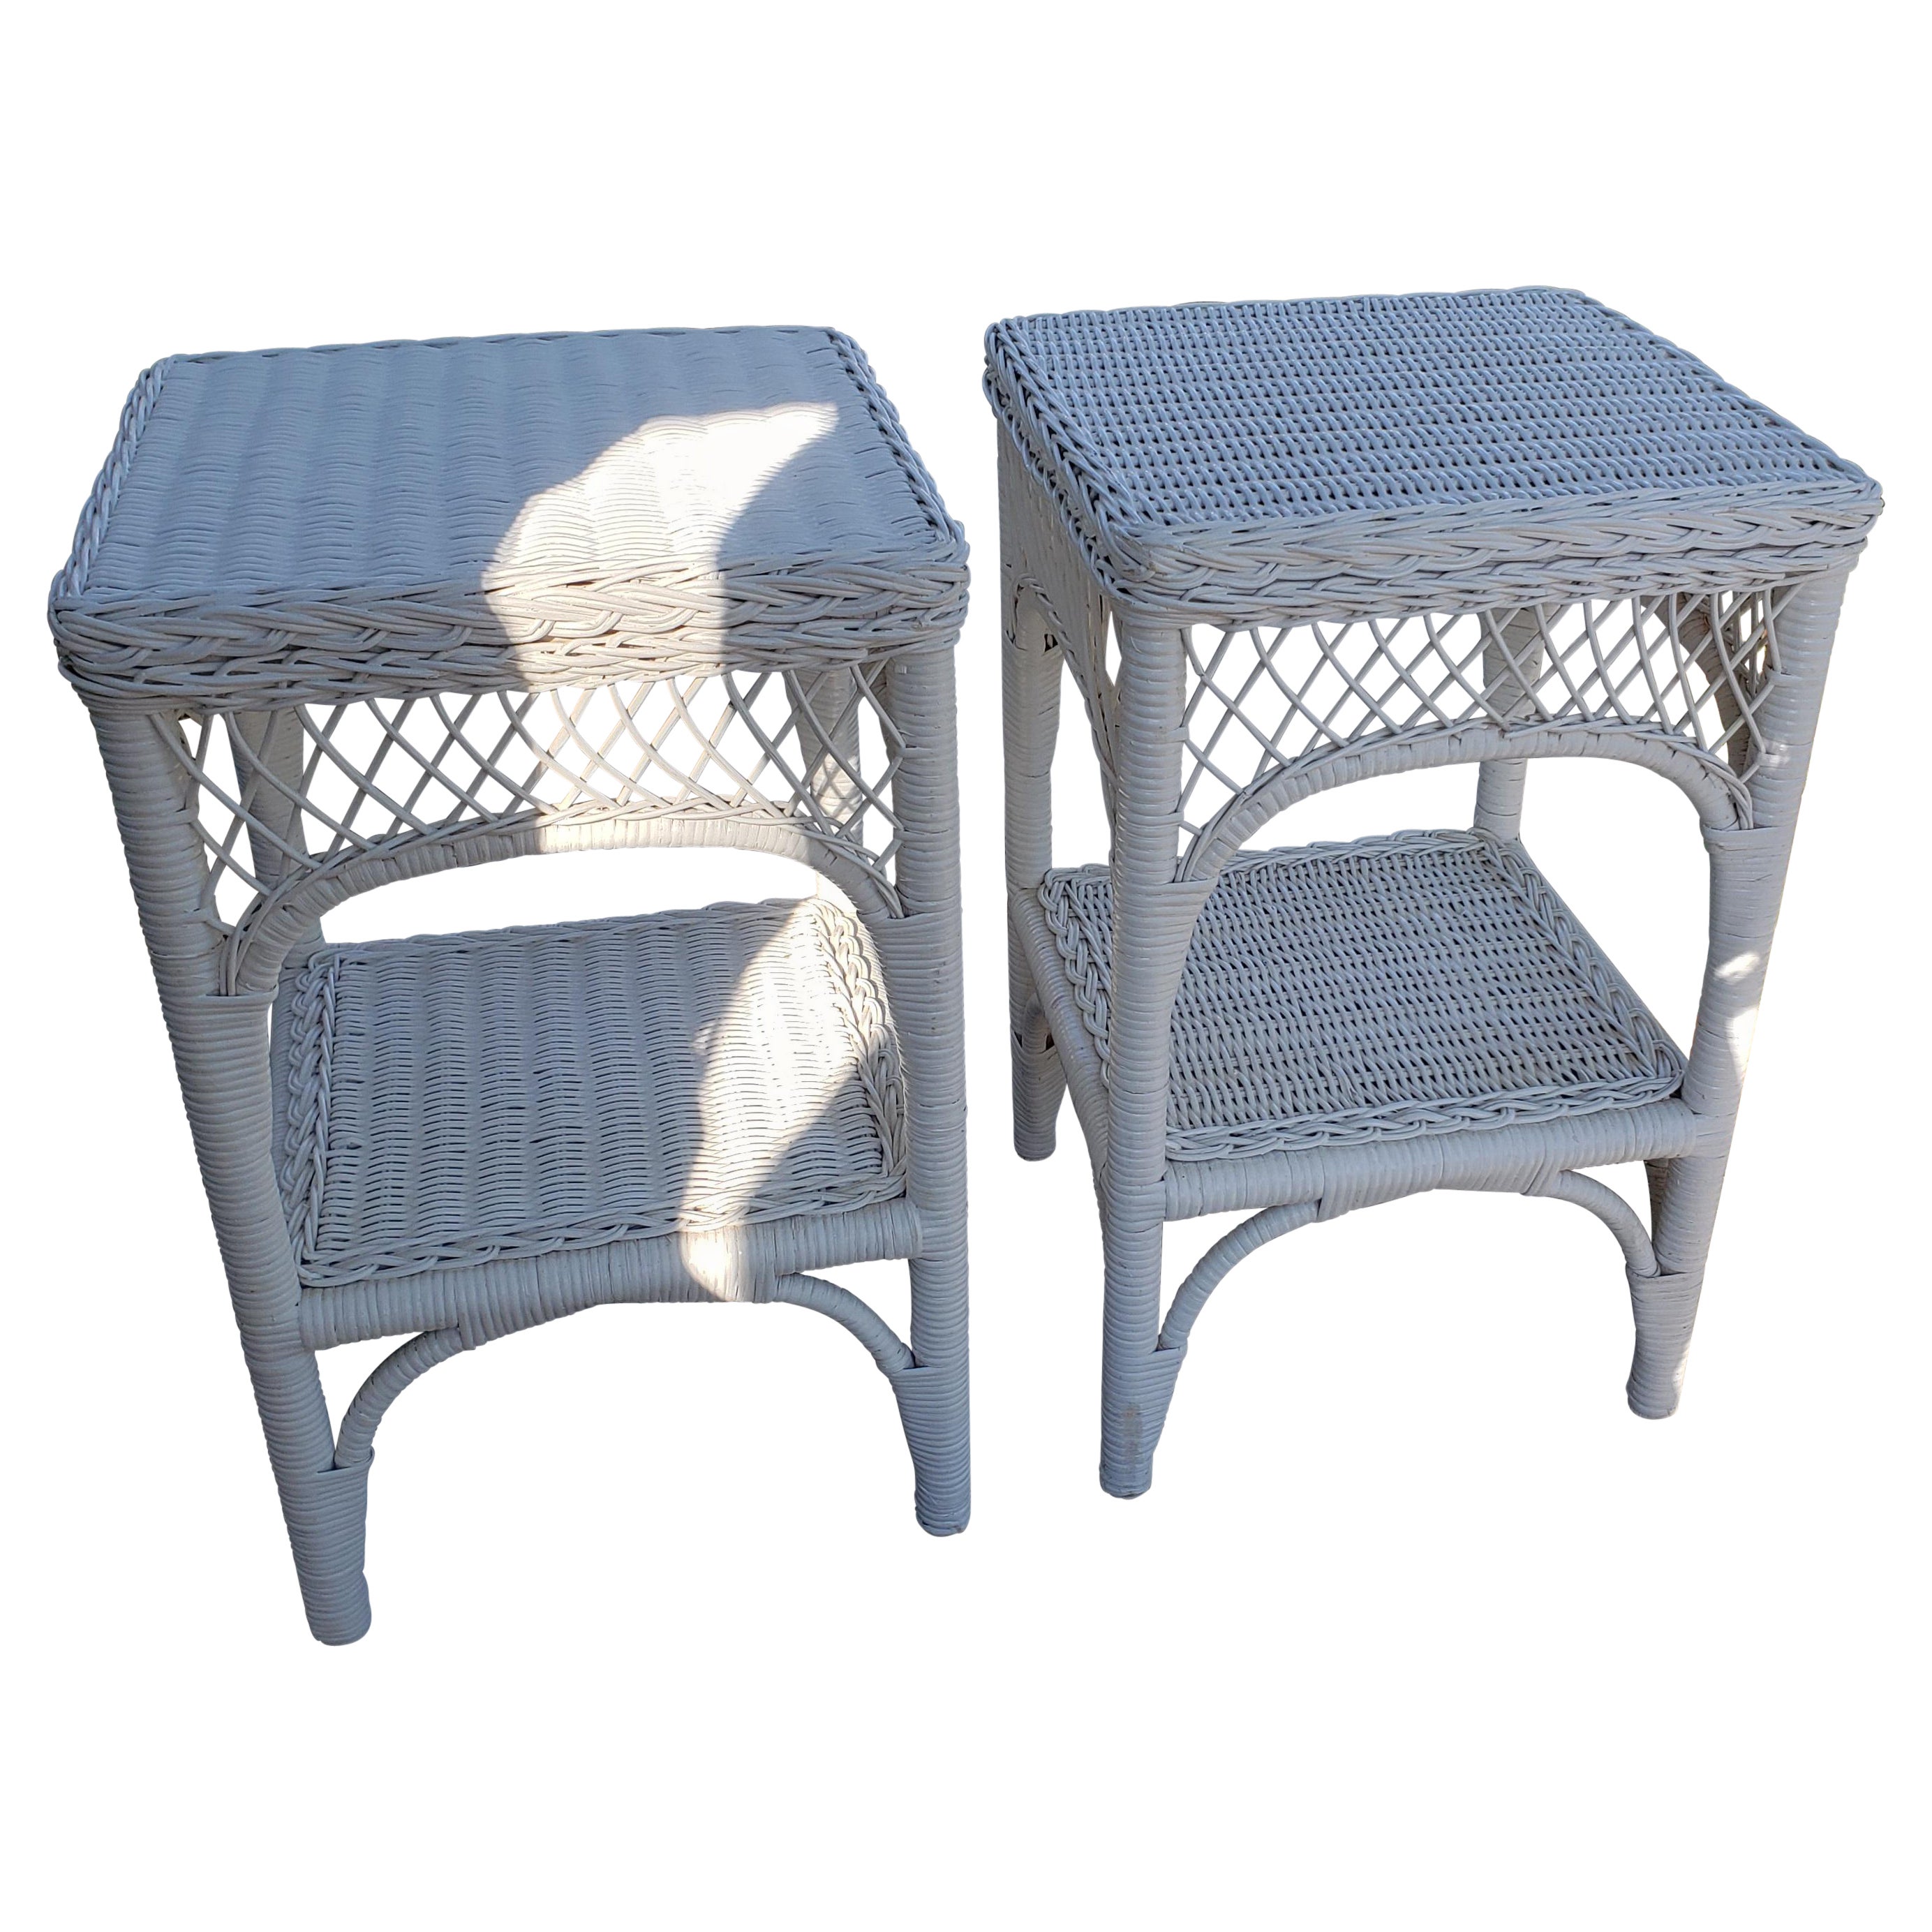 Vintage Rattan and Wicker Side Tables - a Pair